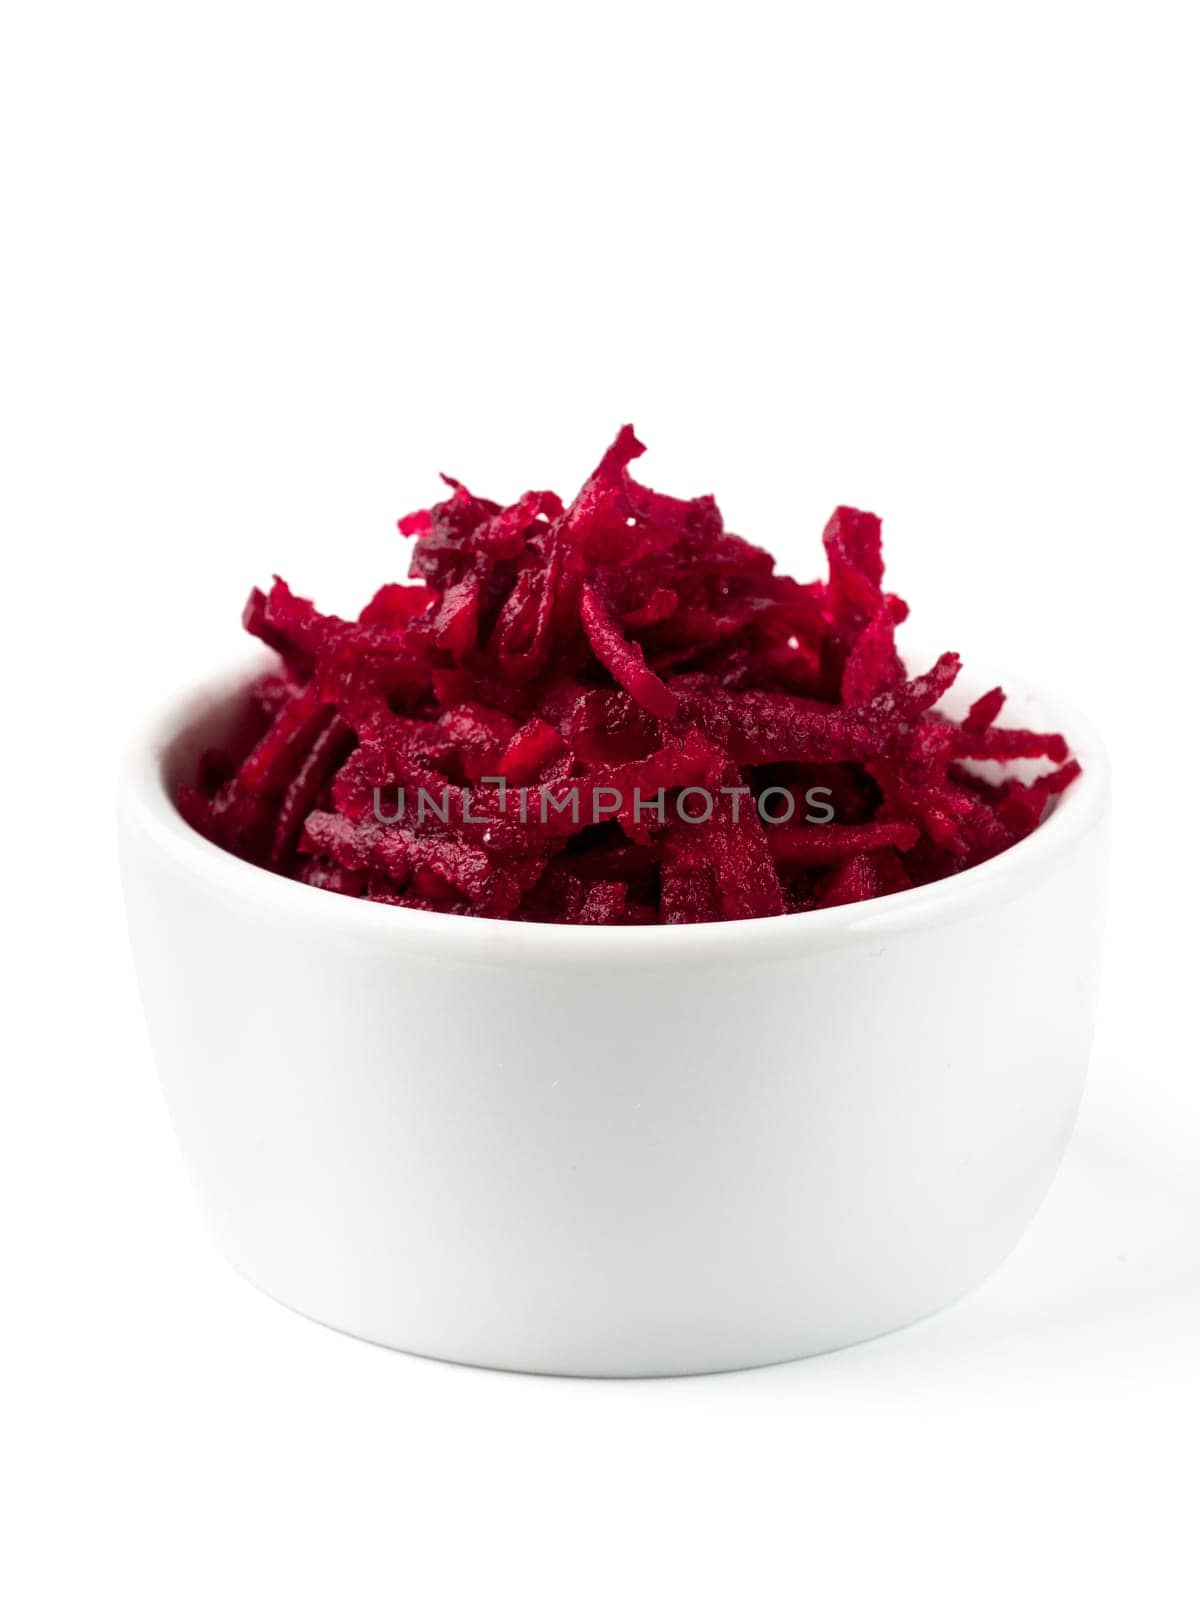 Grated beetroot in ceramic bowl. Shredded beet root salad isolated on white